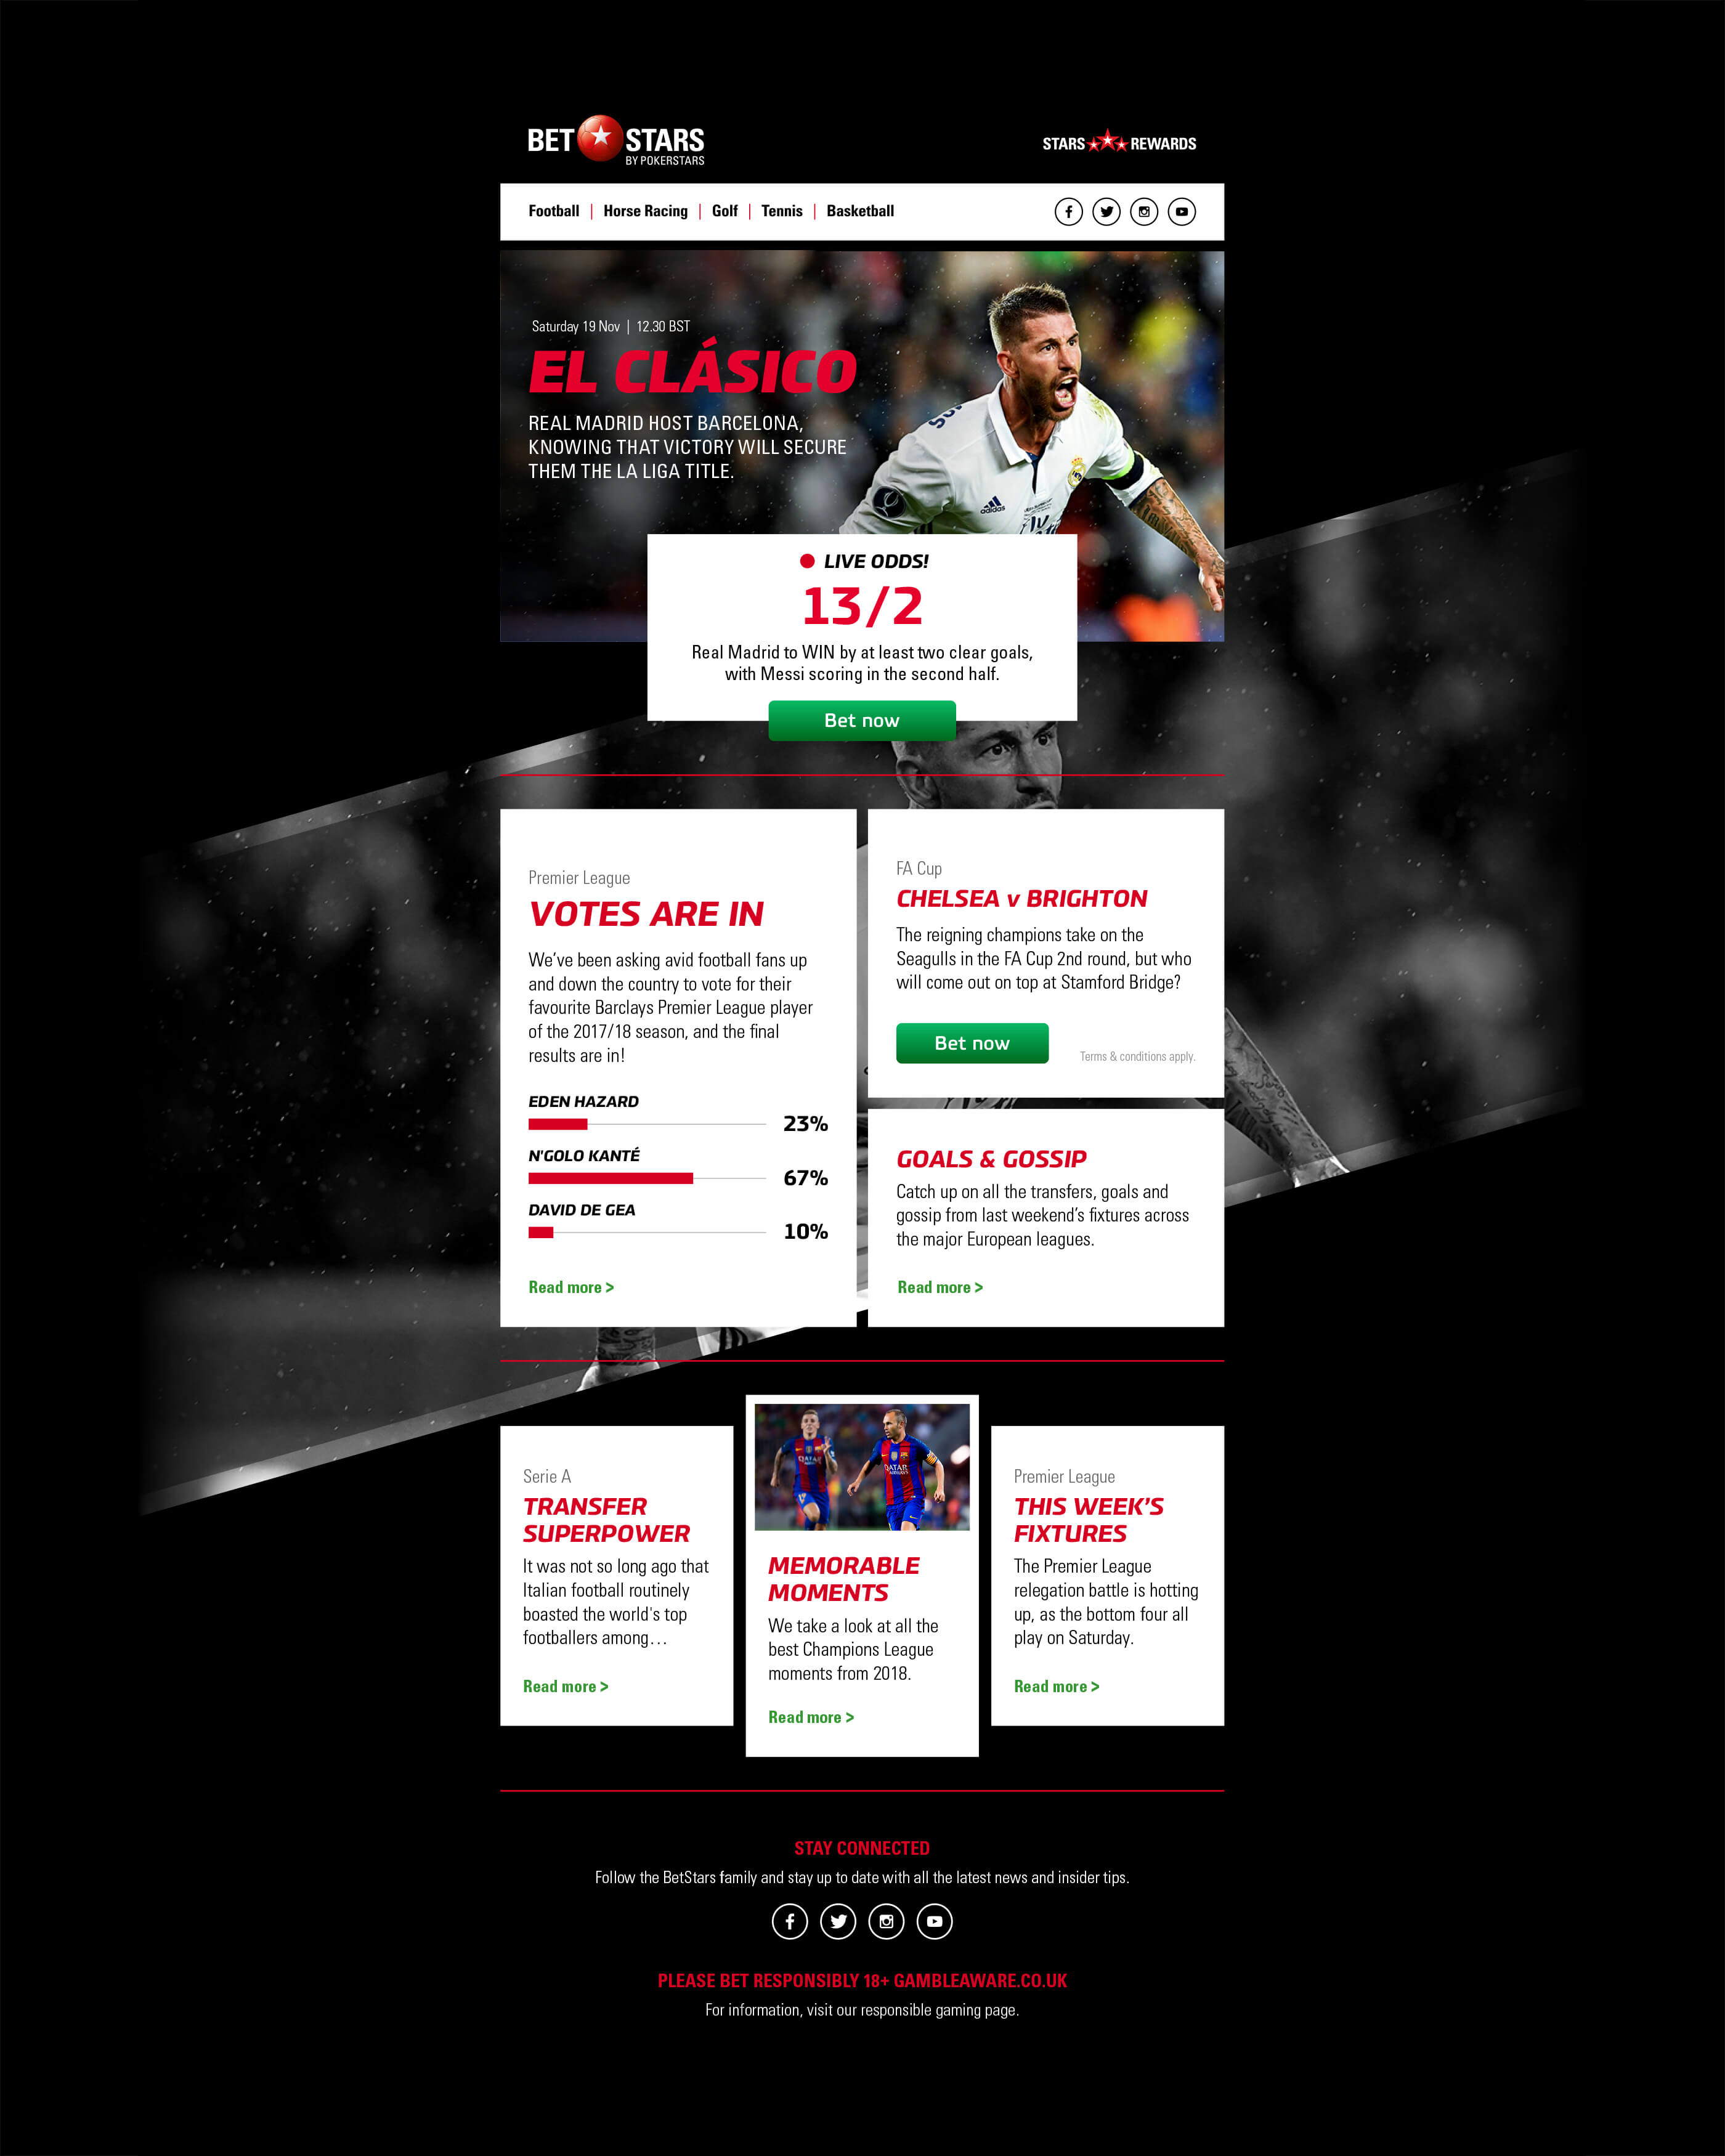 El Clasico email hero header featuring live sports odds on Lionel Messi scoring, plus Andres Iniesta memorable moments